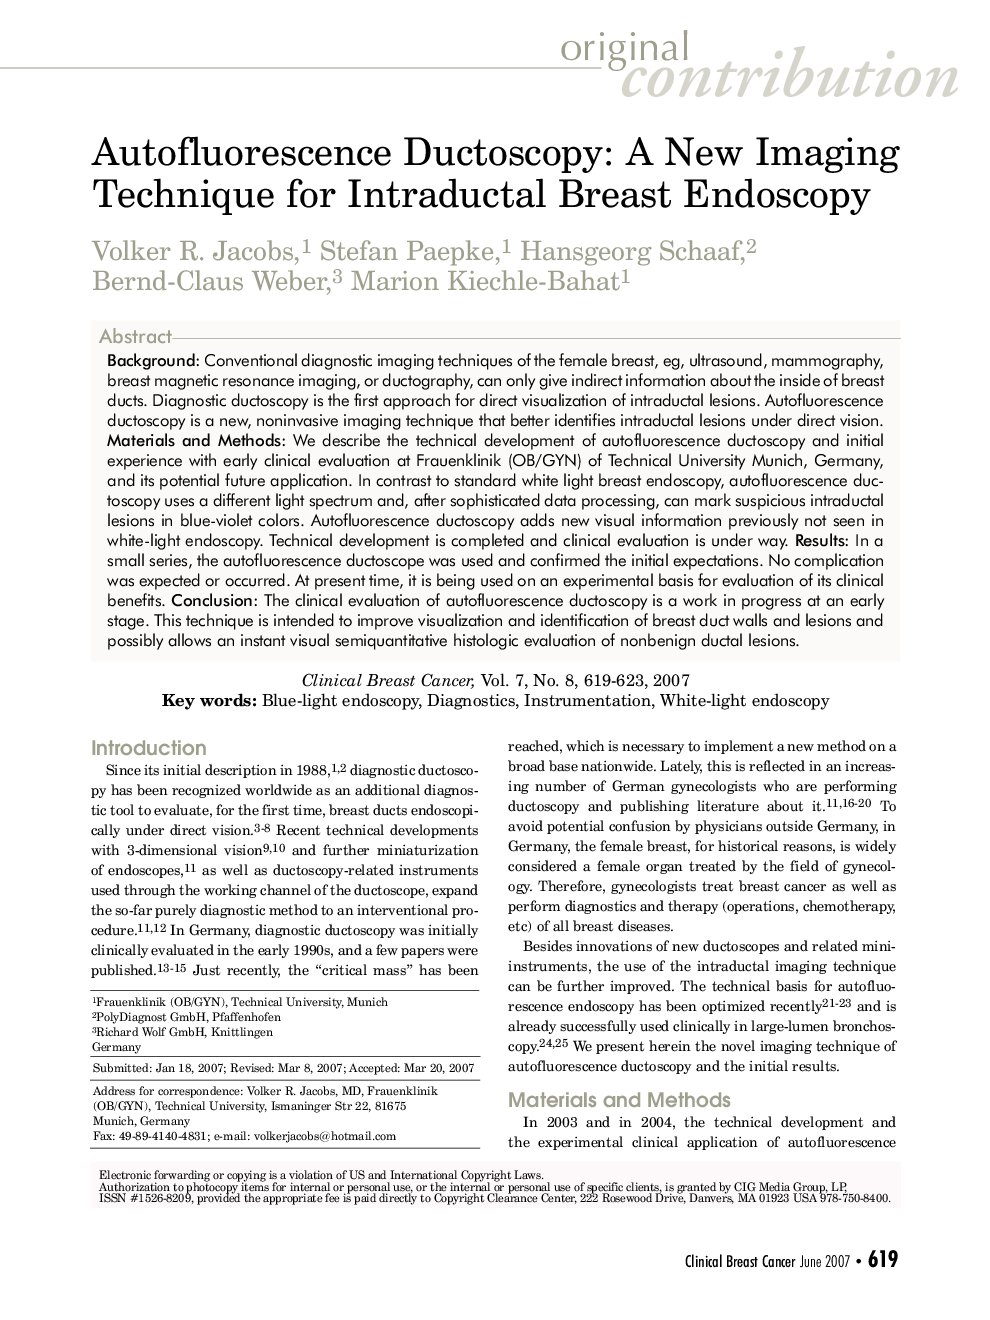 Autofluorescence Ductoscopy: A New Imaging Technique for Intraductal Breast Endoscopy 